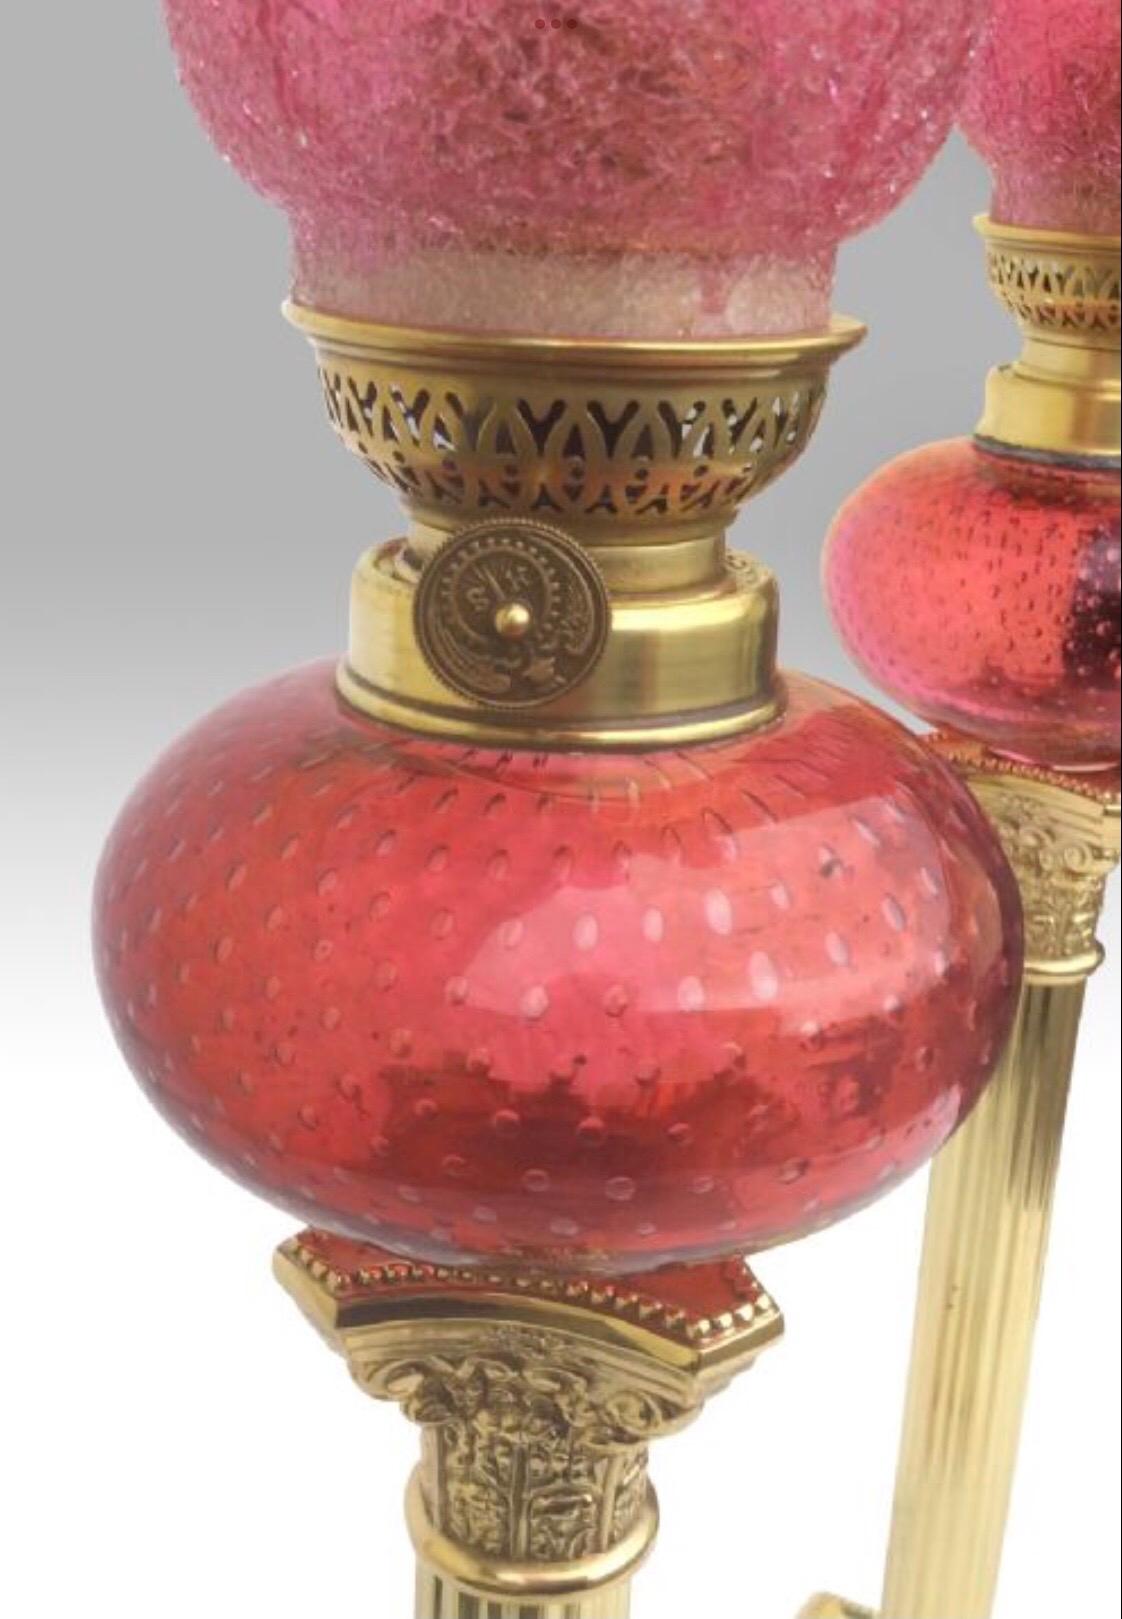 Fabulous pair of tall ruby glass peg oil lamps with painted ruby bowls and tulip ruby crackle shades.
brass corinthian column pillars.
C1900
Measures: 21.5ins. tall.